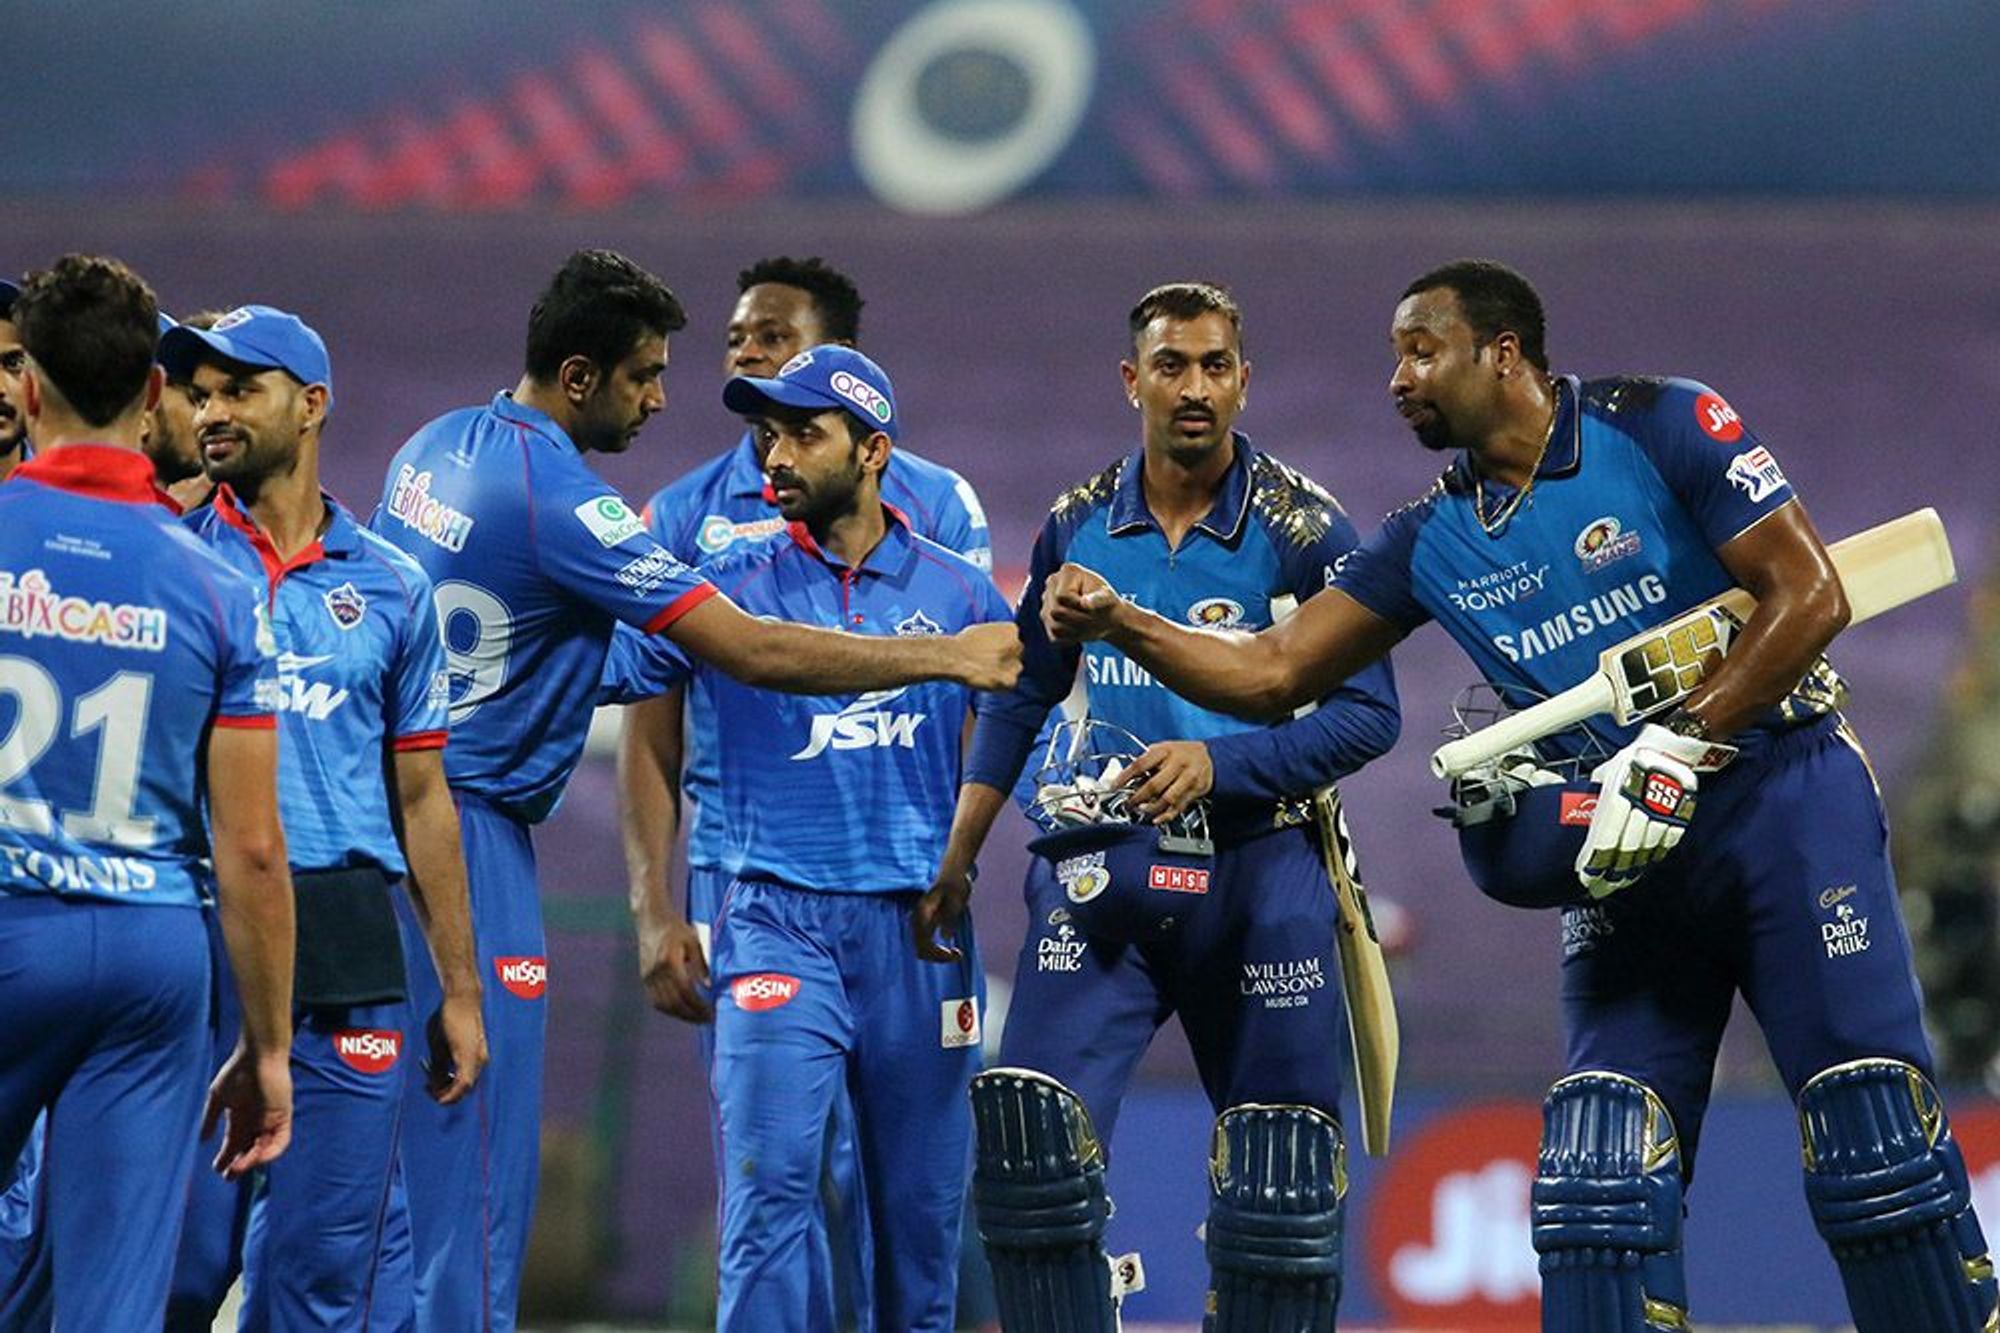 Mumbai Indians defeated Delhi Capitals by 9 wickets